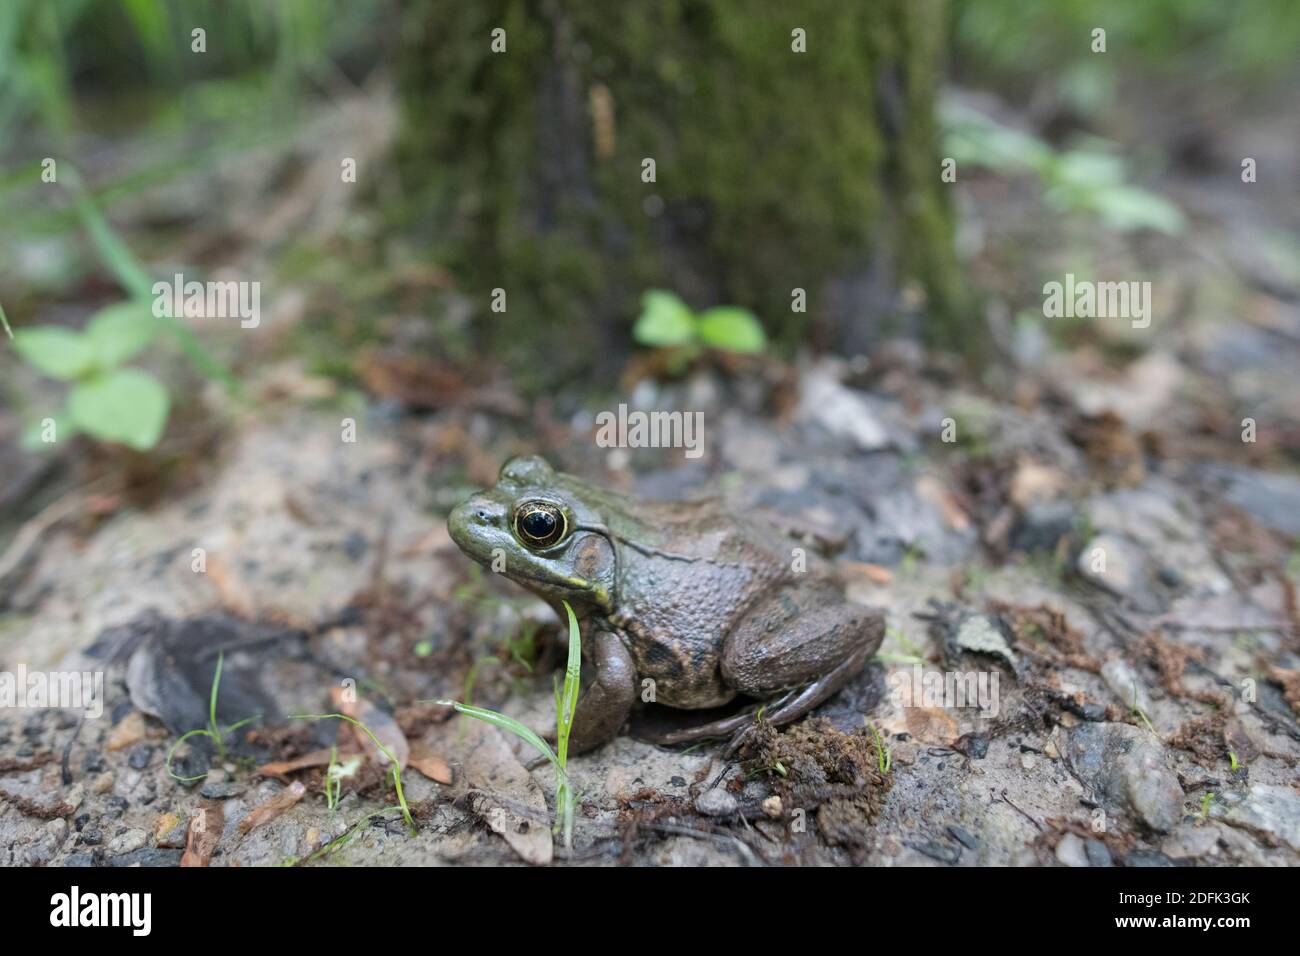 An American bullfrog on the forest floor. Stock Photo